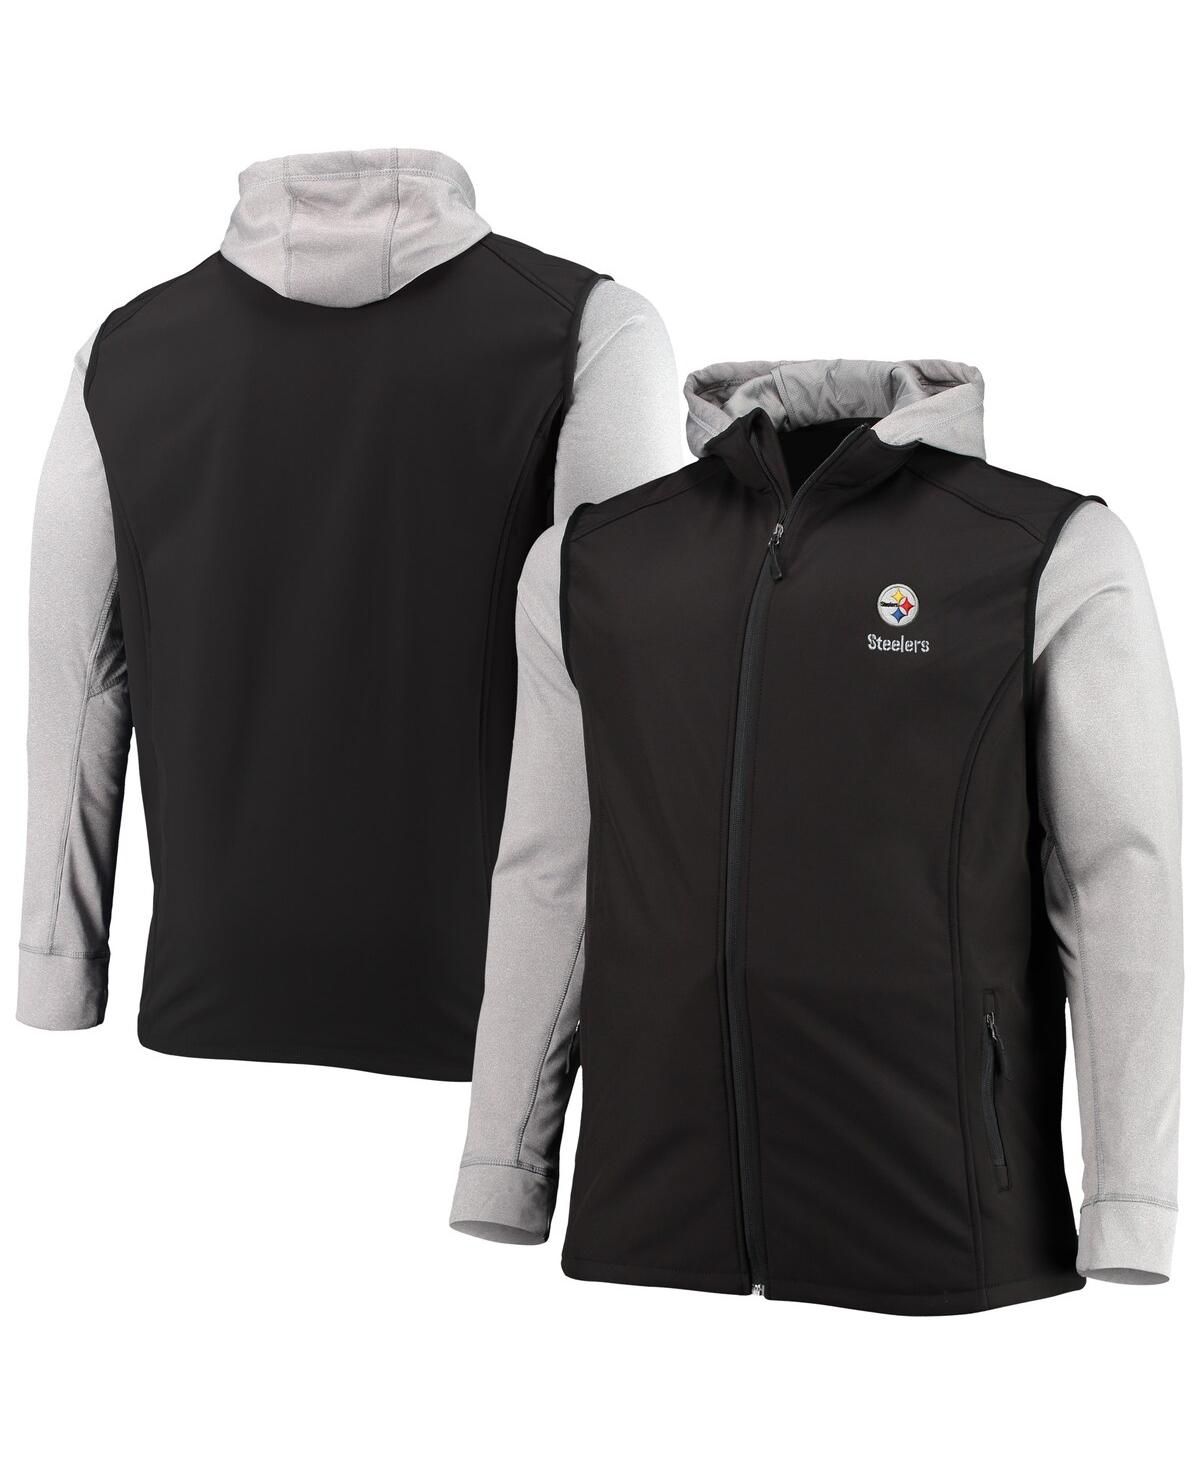 Men's Dunbrooke Black and Gray Pittsburgh Steelers Big and Tall Alpha Full-Zip Hoodie Jacket - Black, Gray